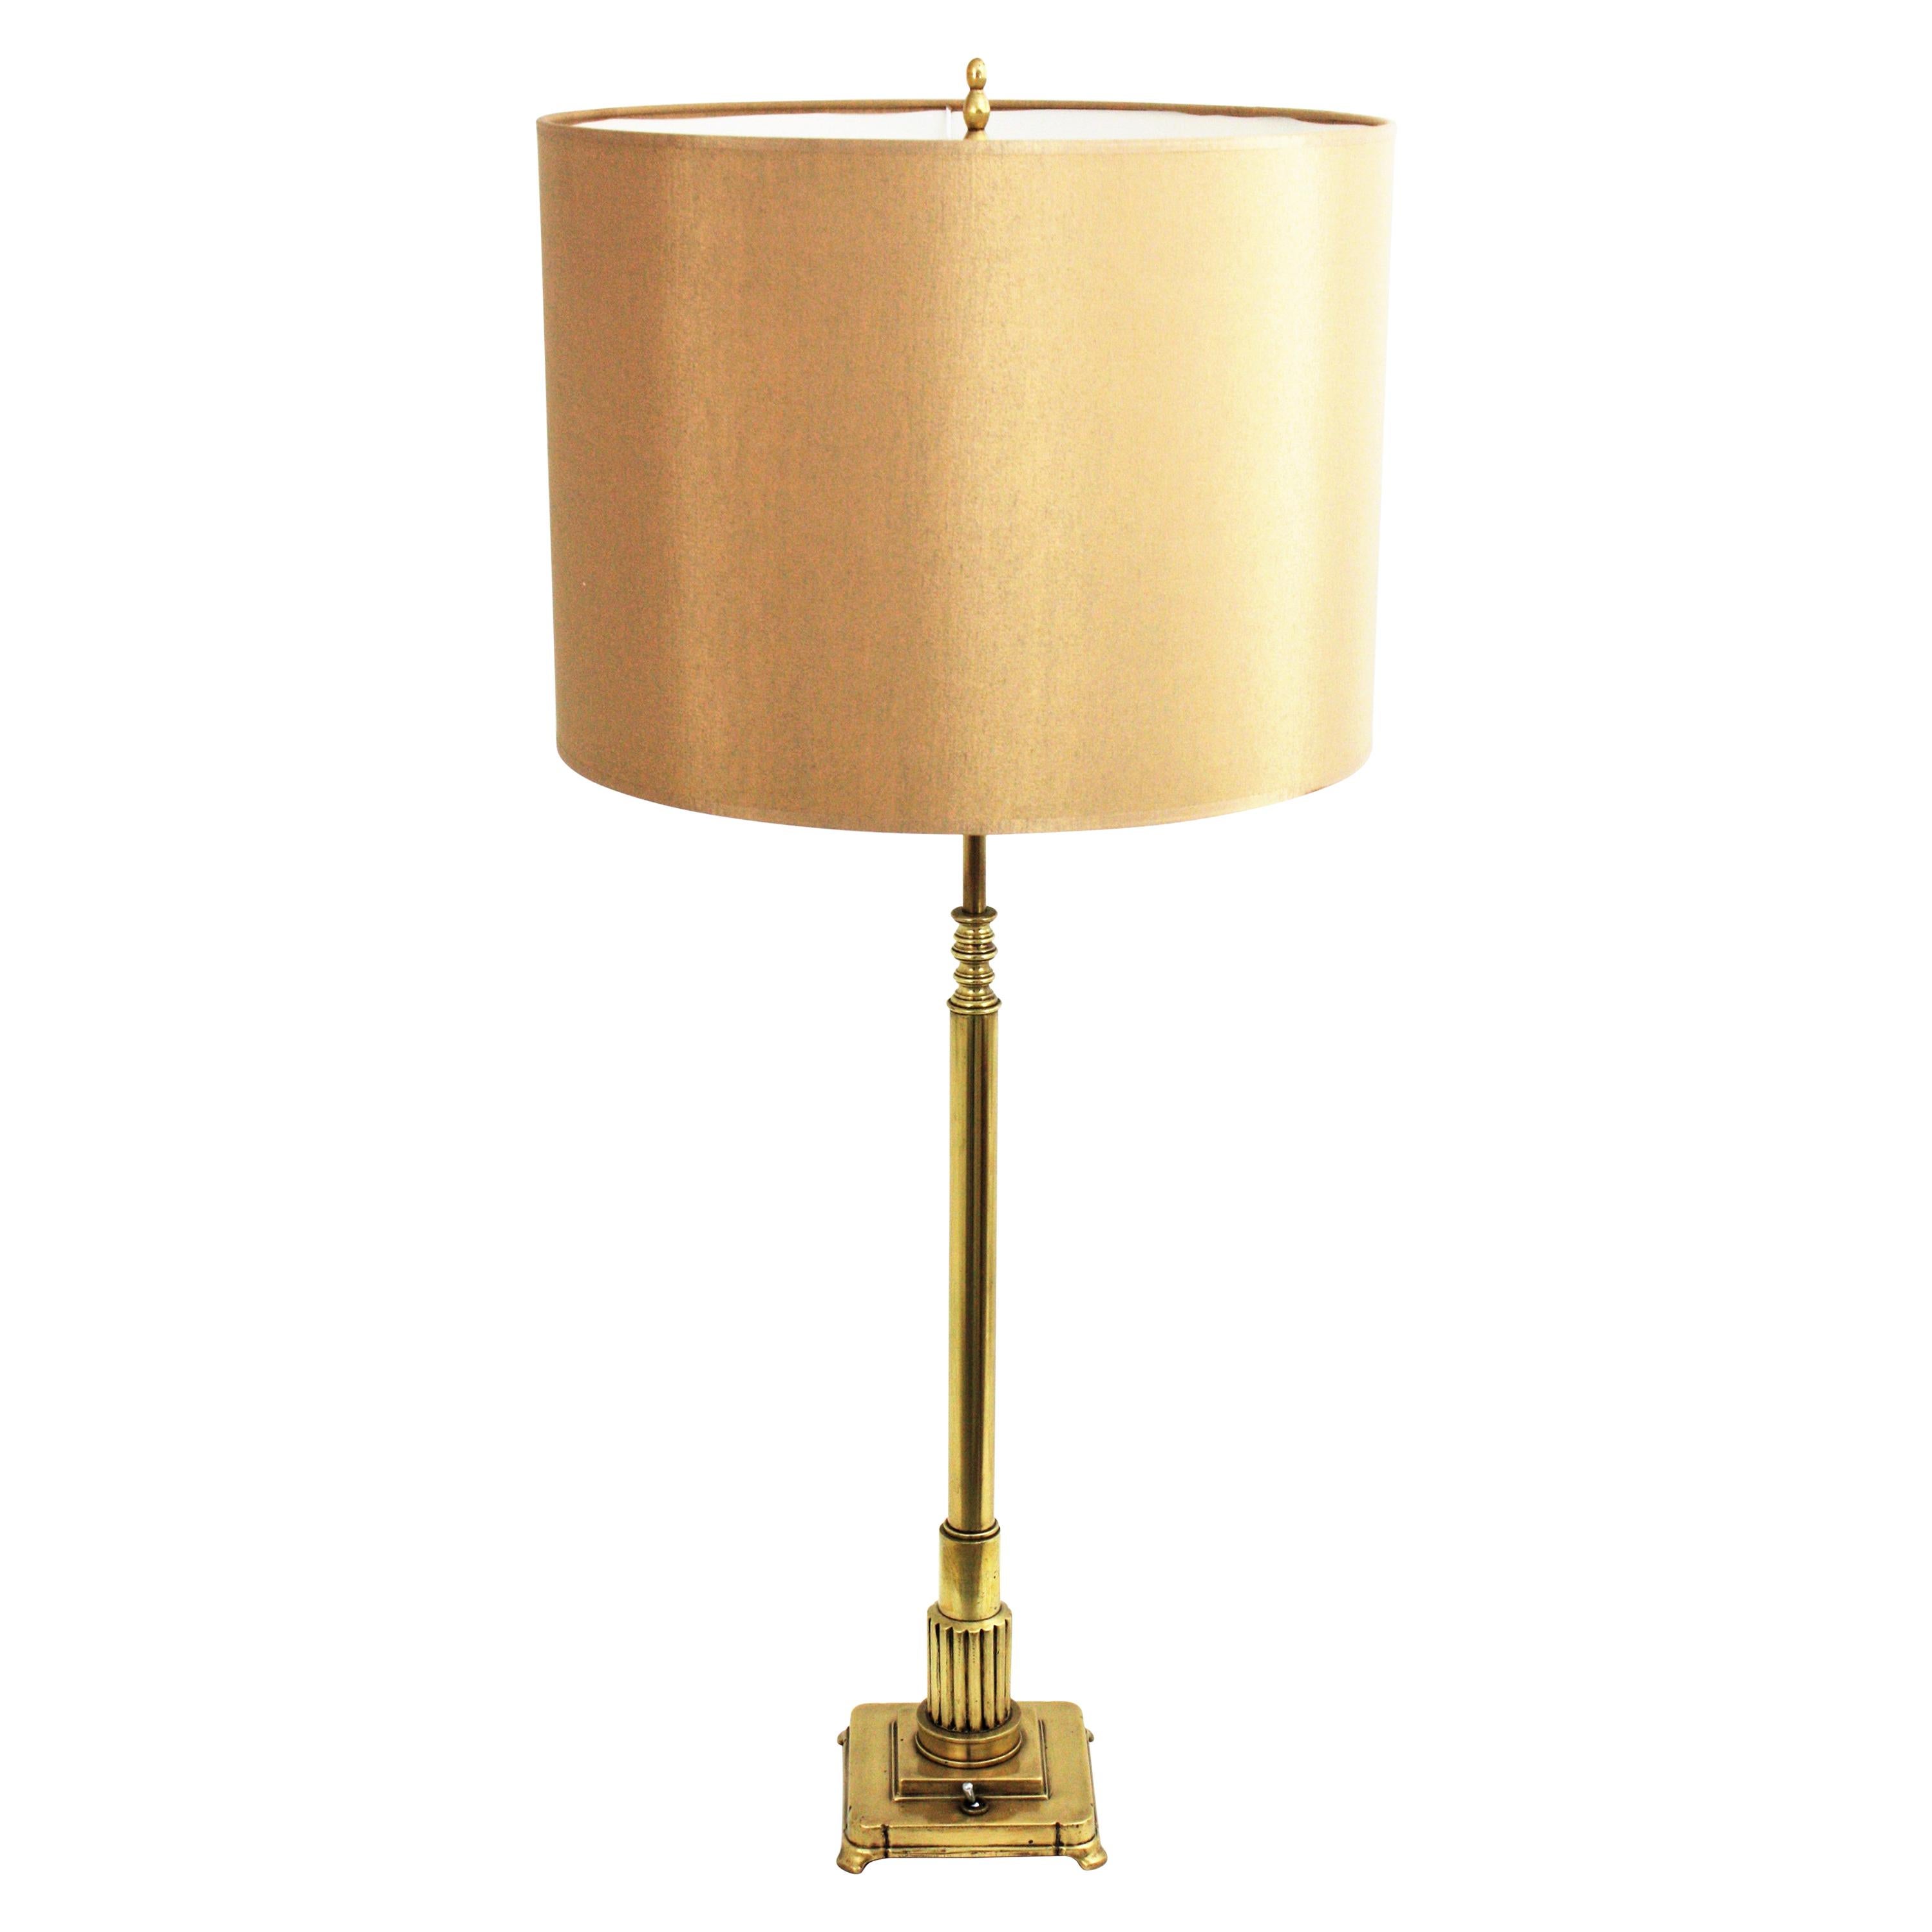 French Art Deco Column Table Lamp in Polished Brass For Sale